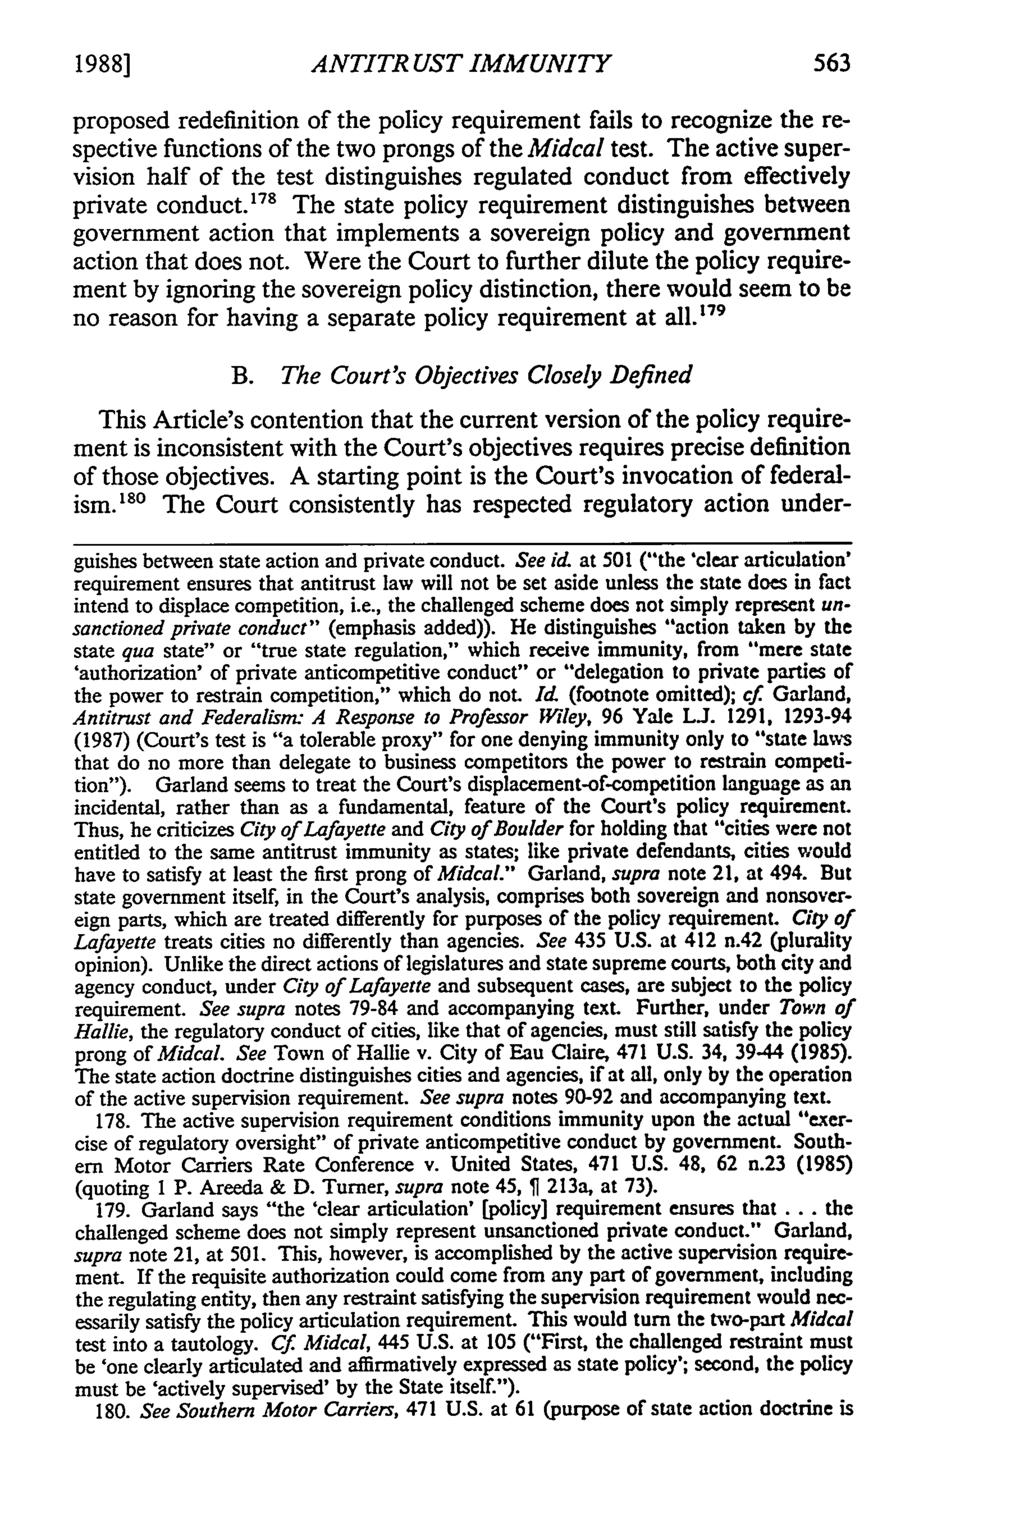 1988] ANTITRUST IMMUNITY proposed redefinition of the policy requirement fails to recognize the respective functions of the two prongs of the Midcal test.